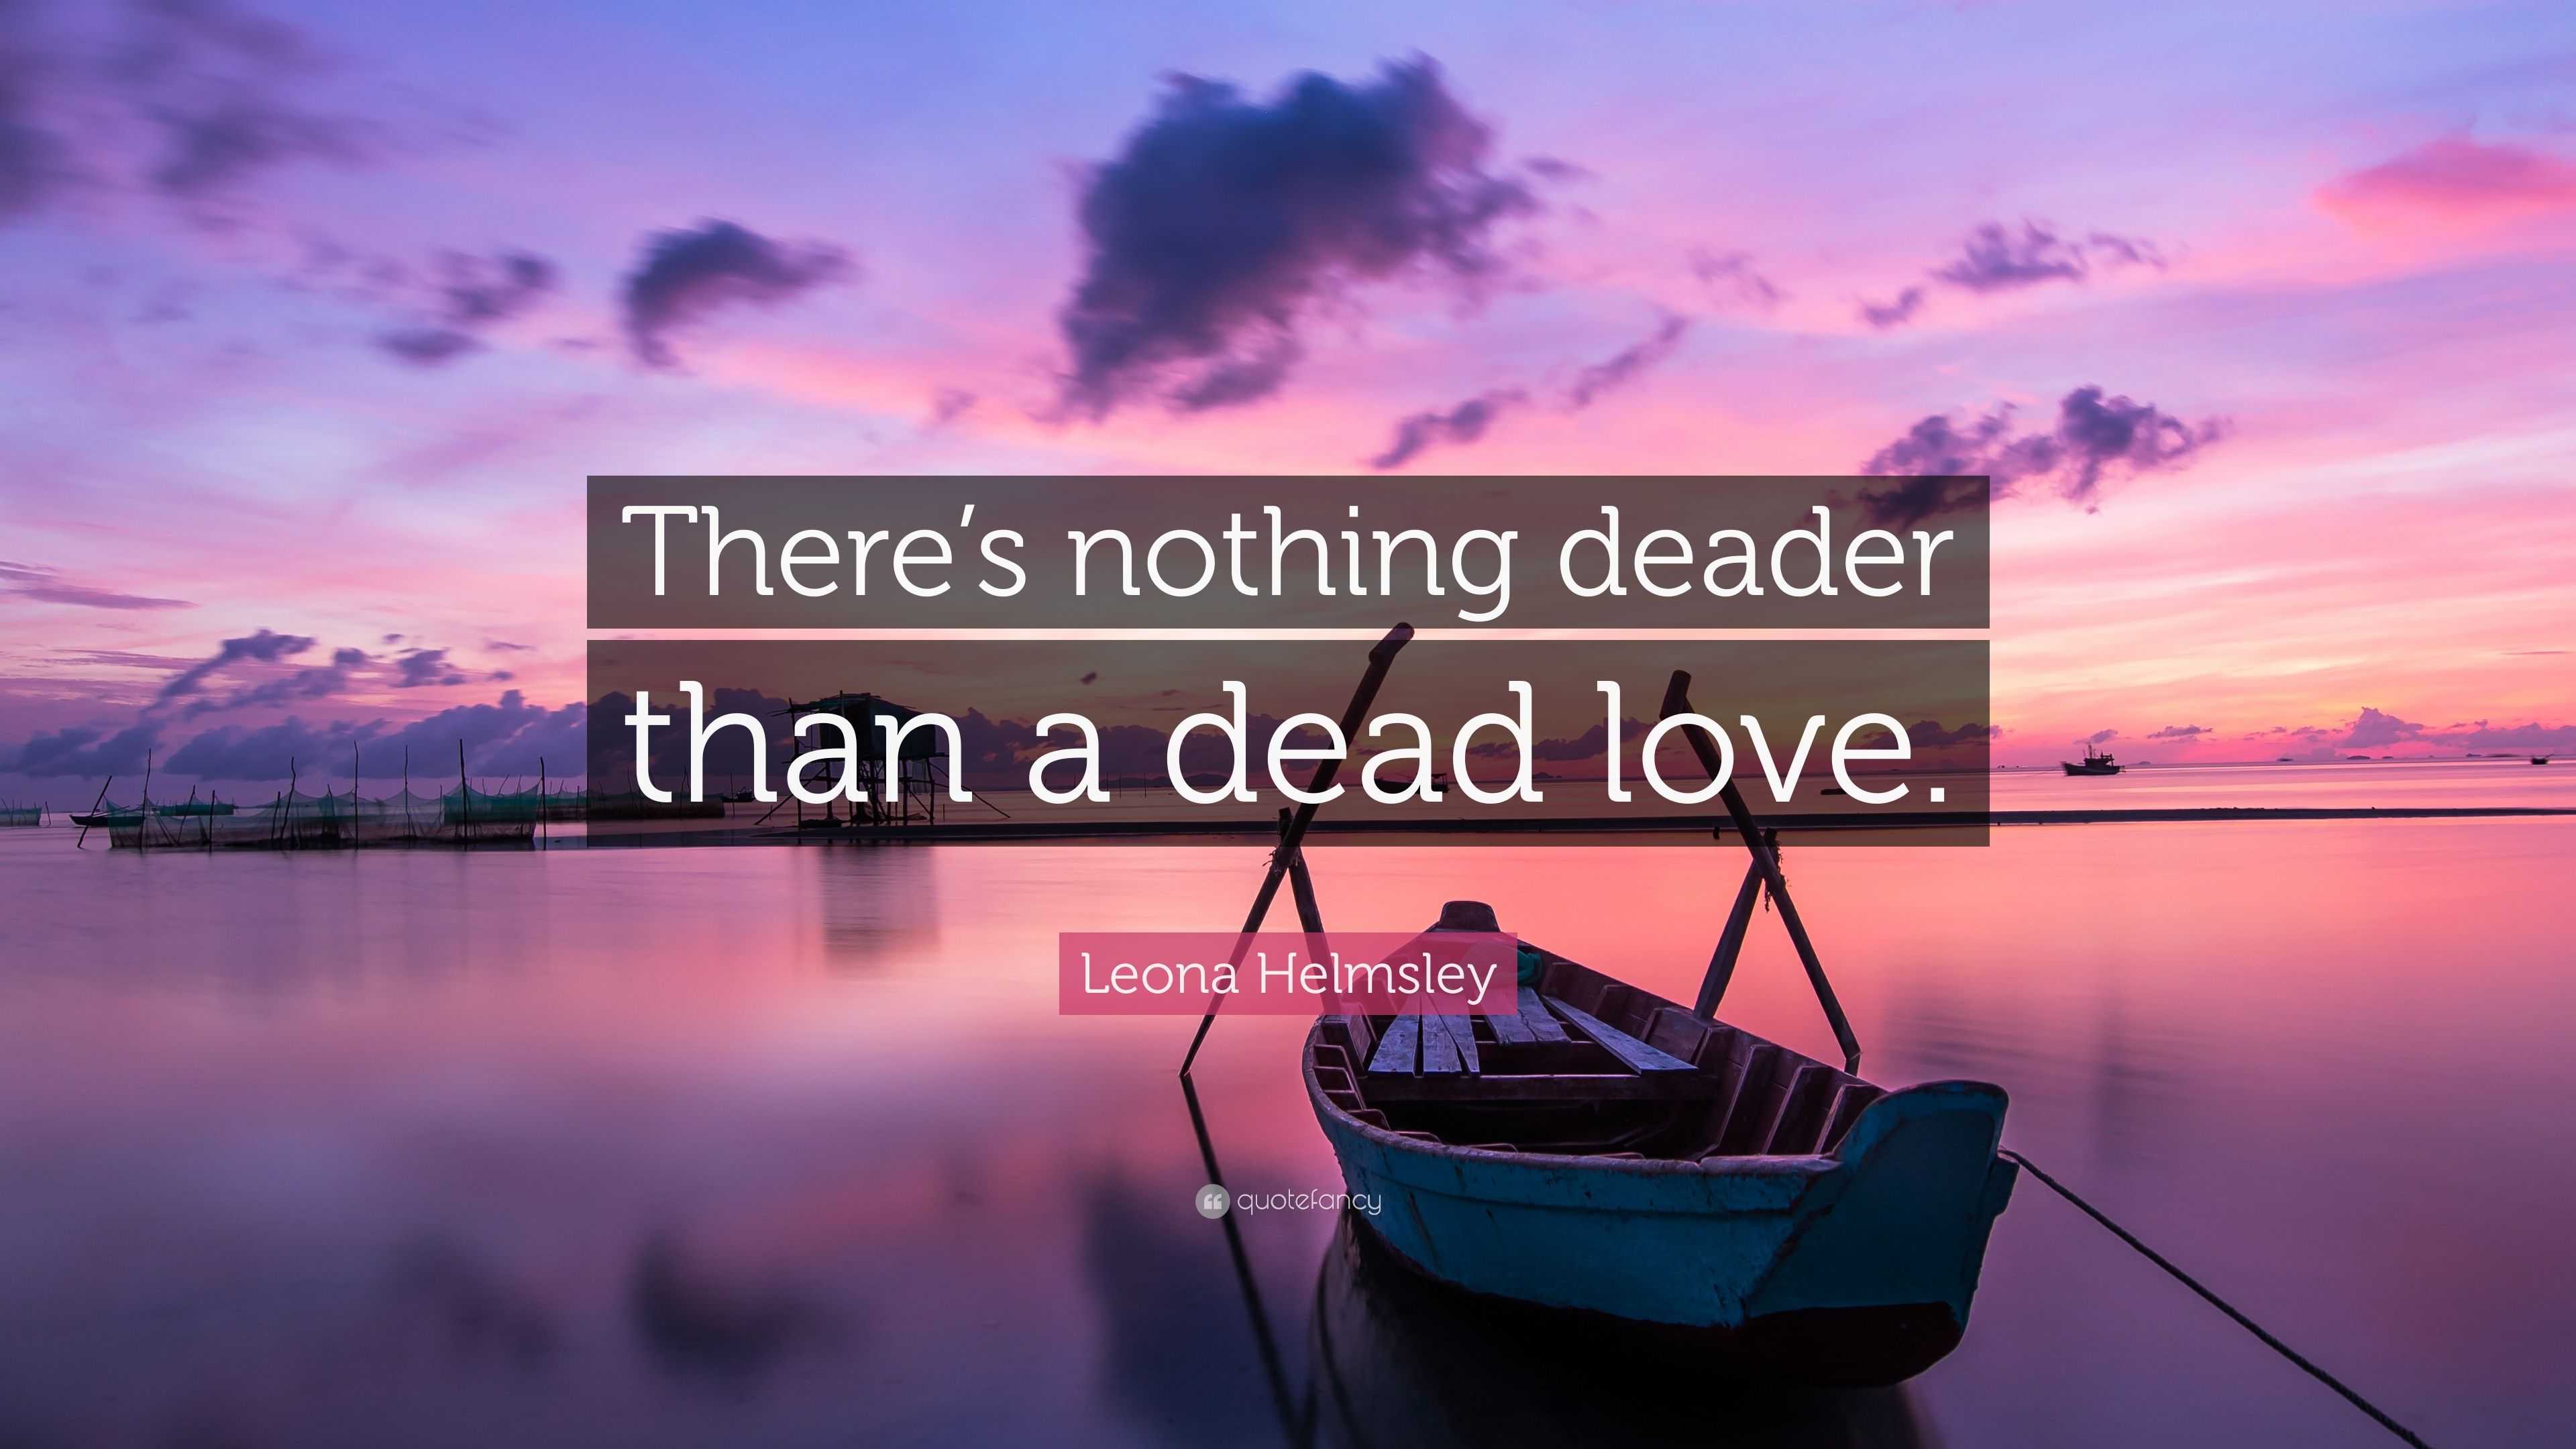 Leona Helmsley Quote: “There’s nothing deader than a dead love.”